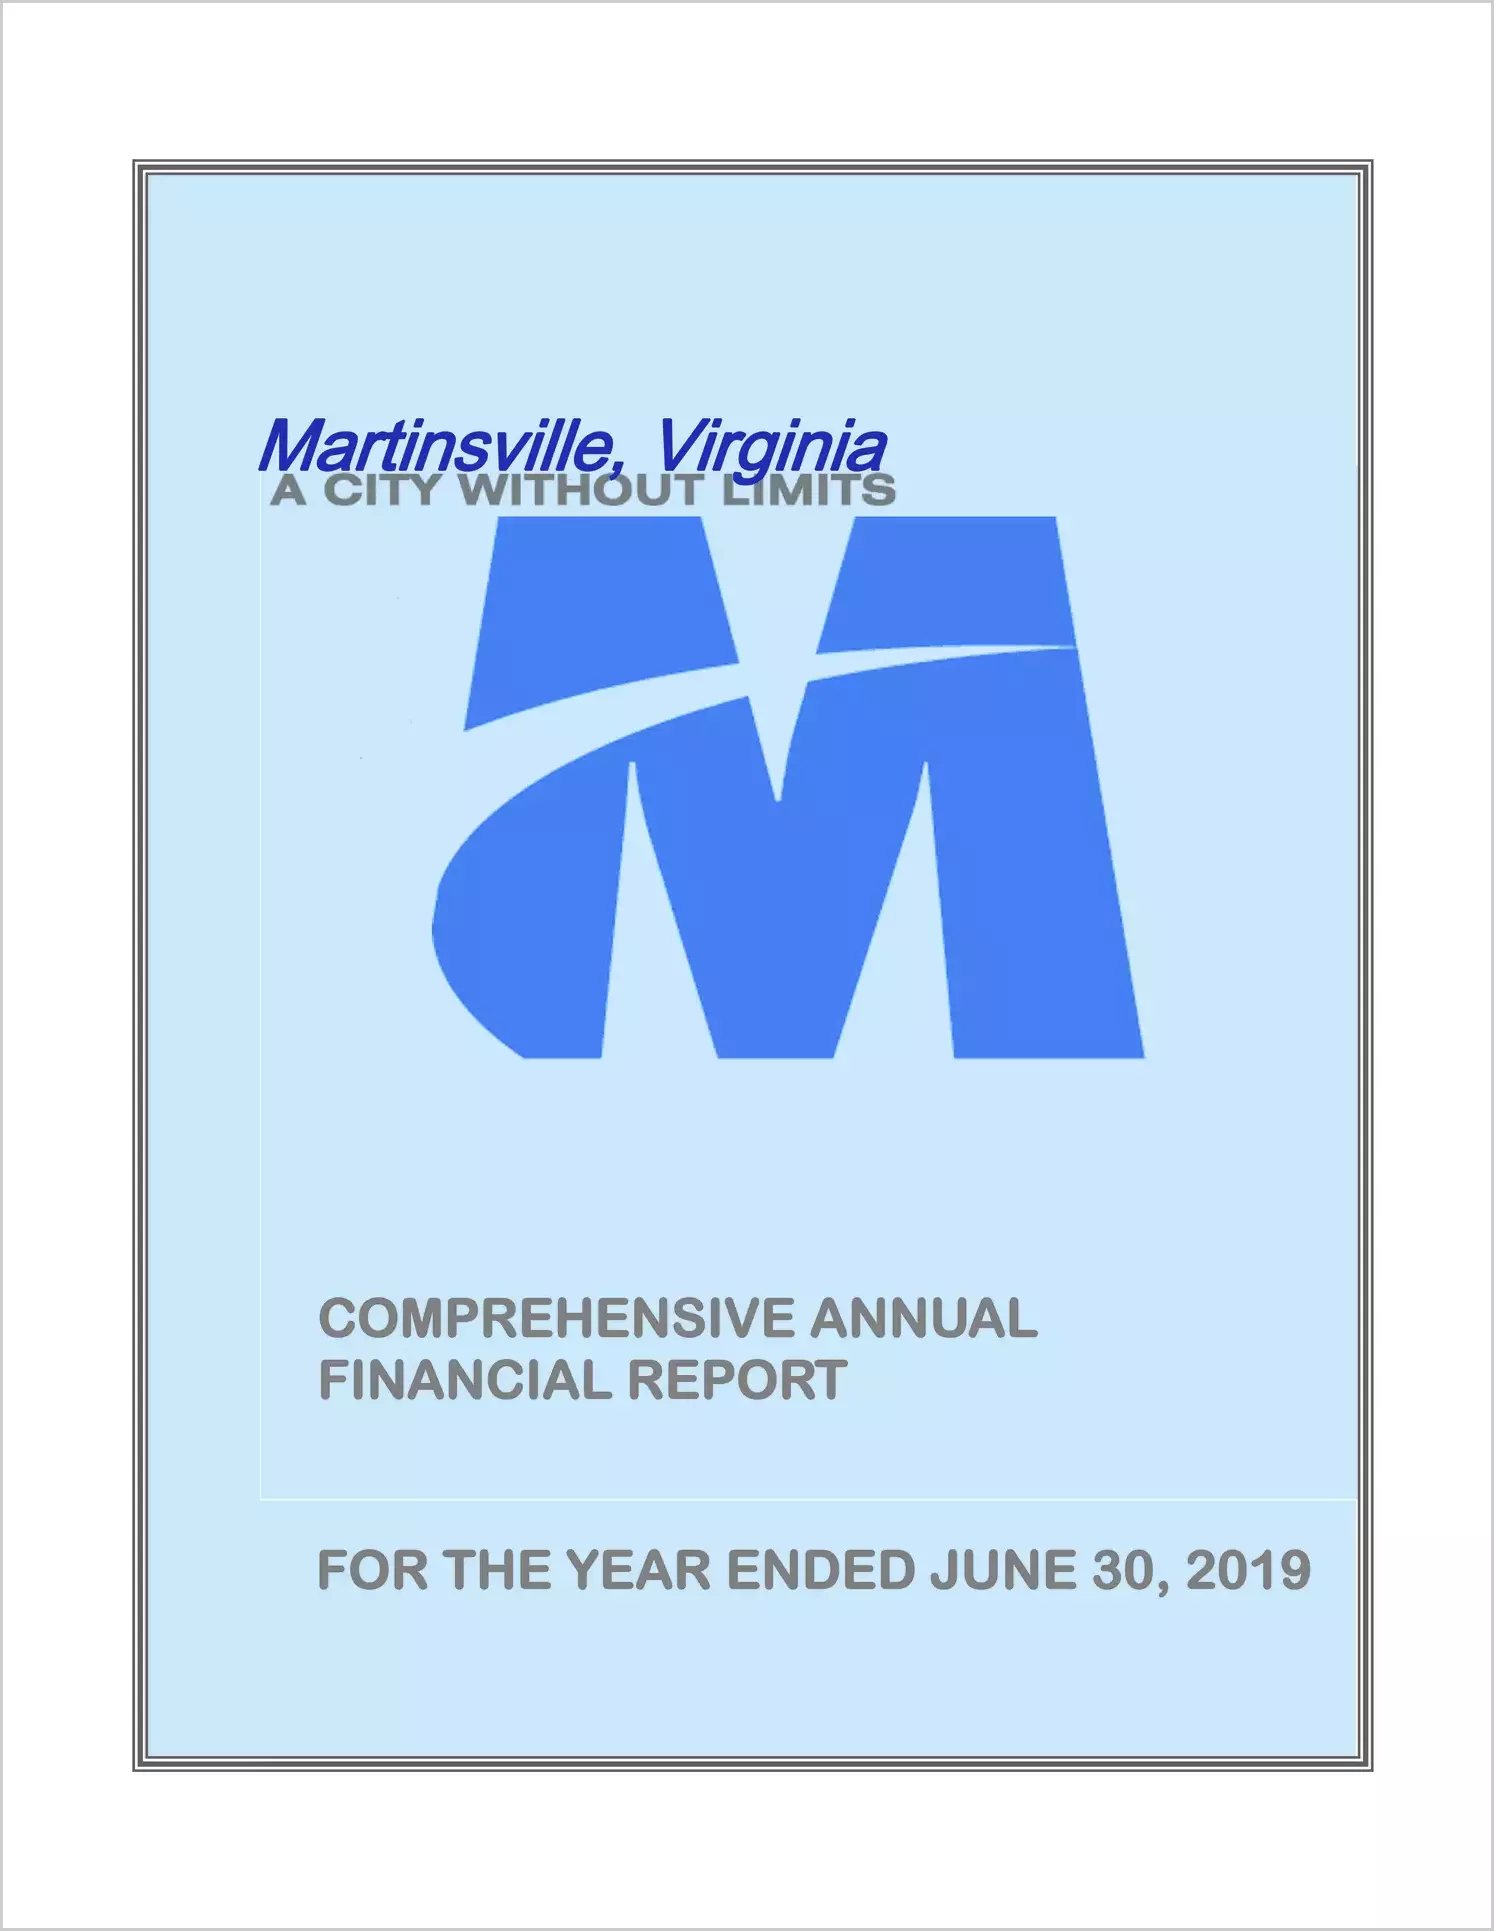 2019 Annual Financial Report for City of Martinsville